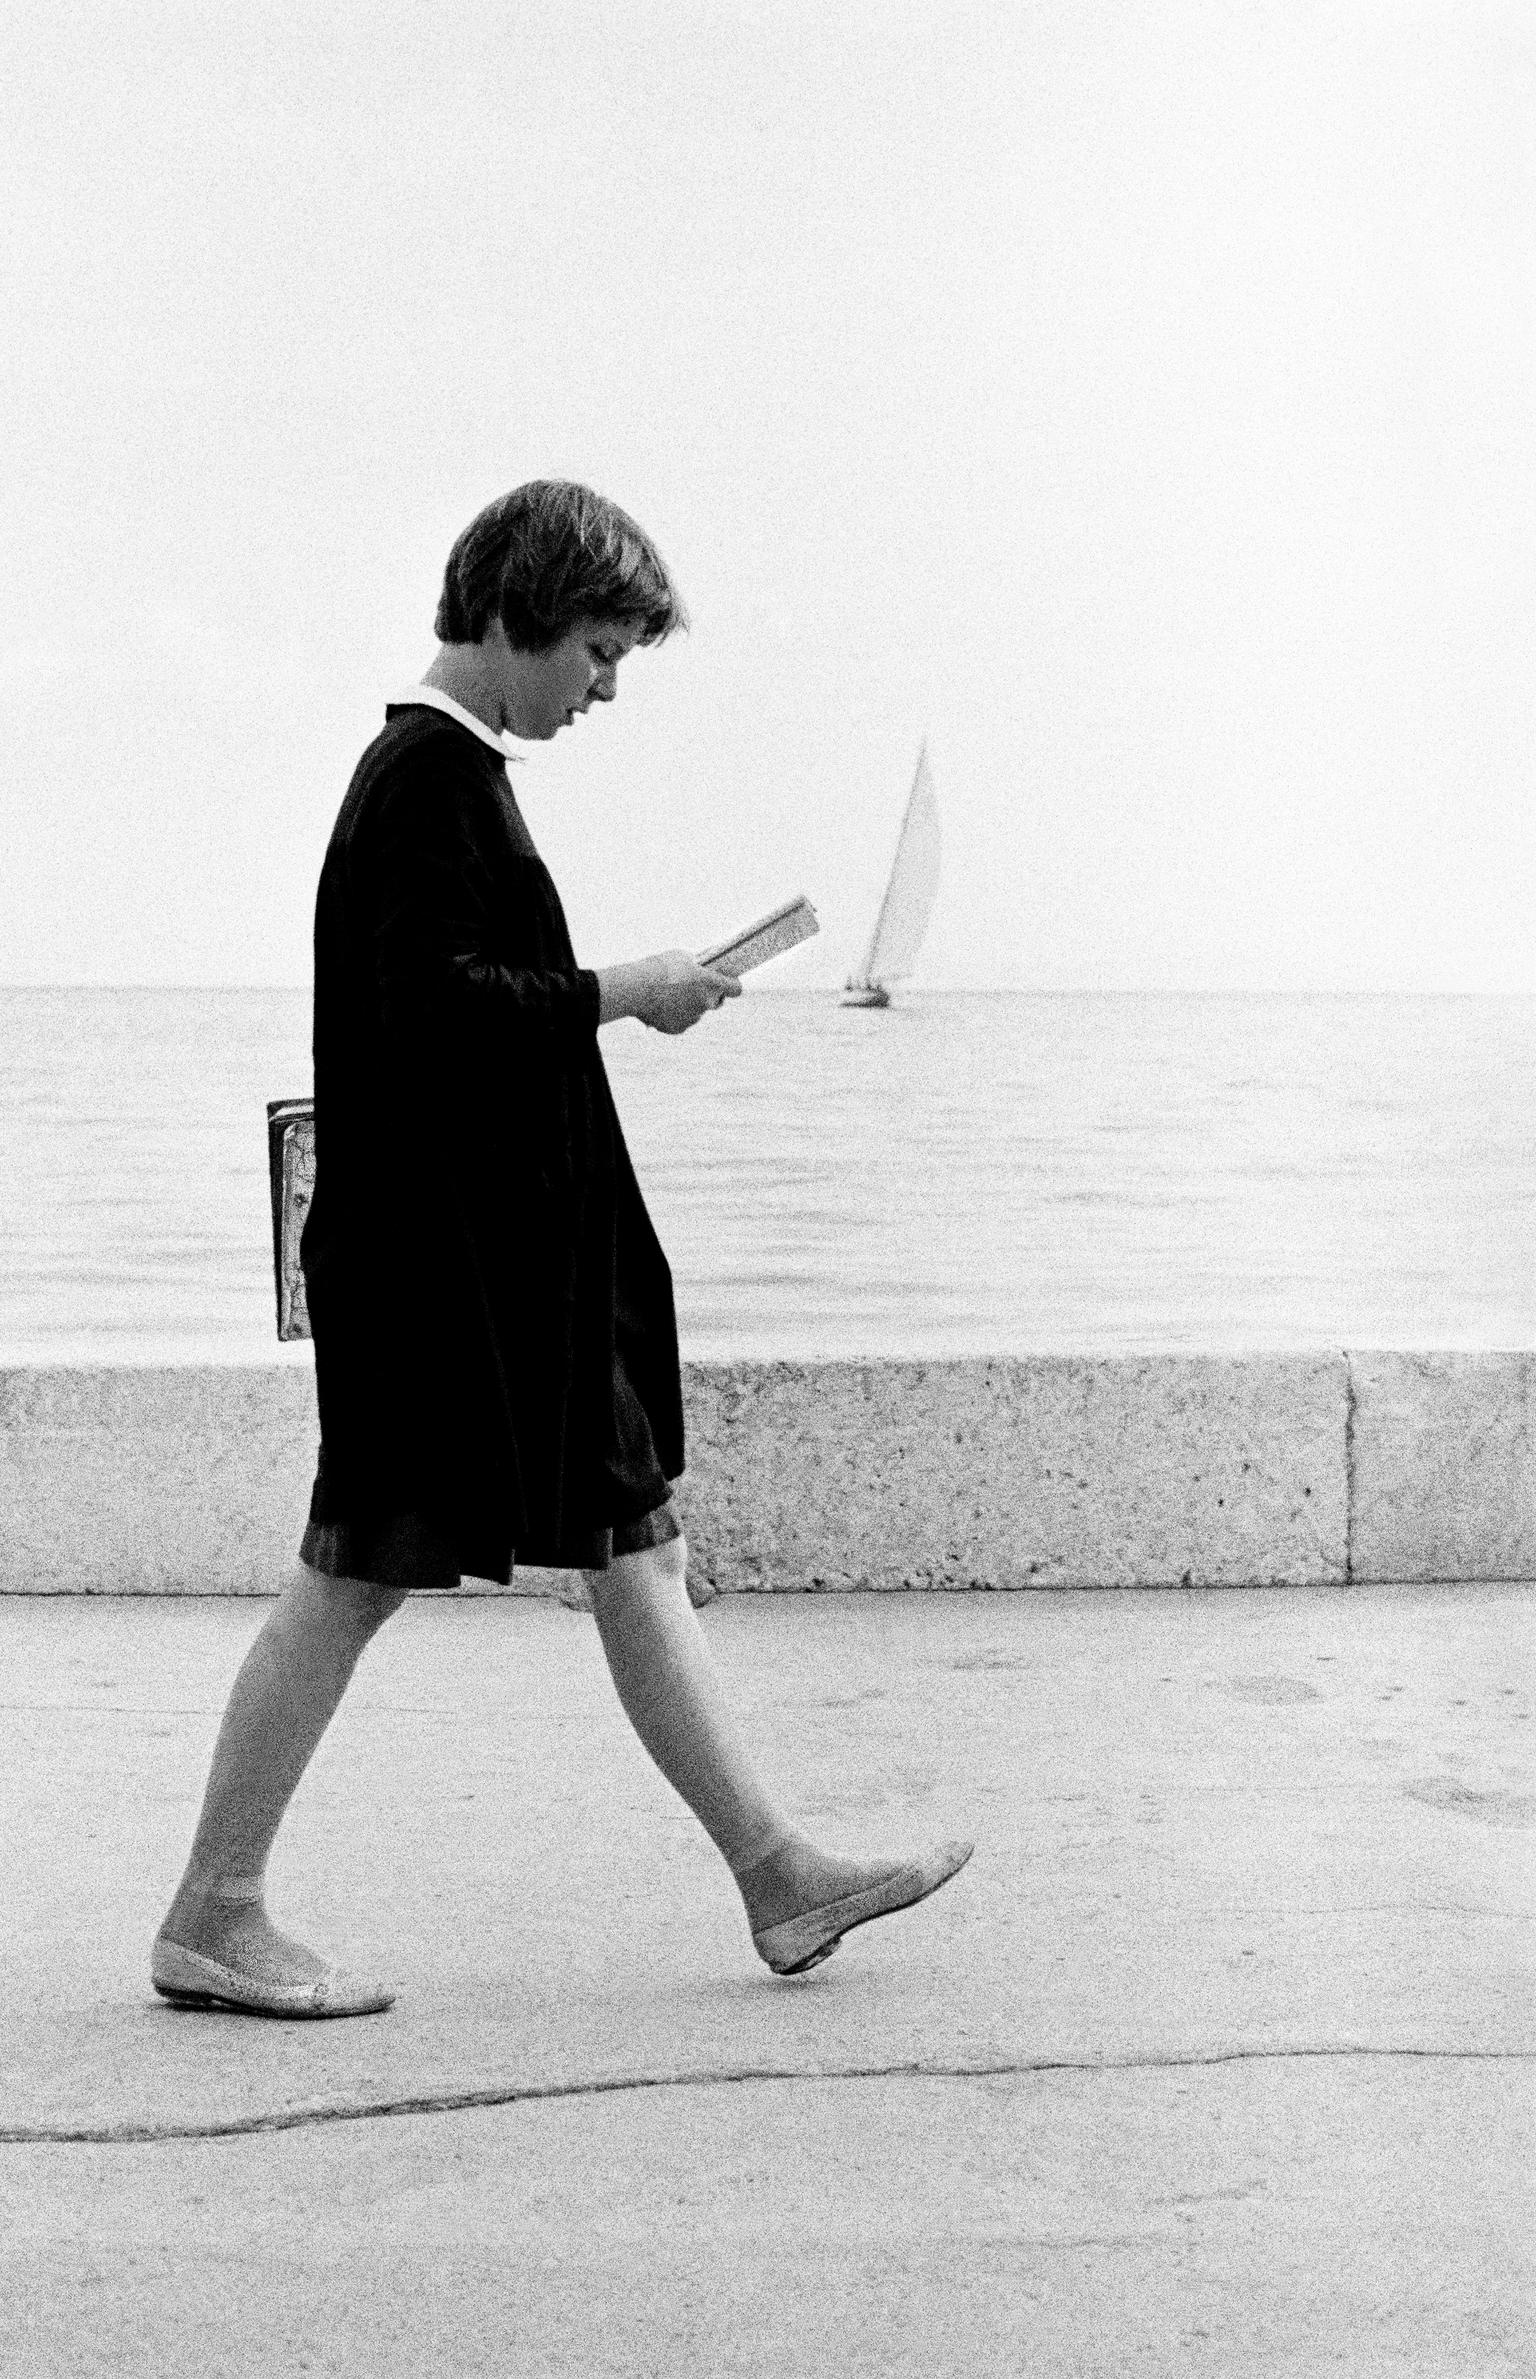 Student in the local school dress walks while reading of the sea front. Dubrovnik. Croatia